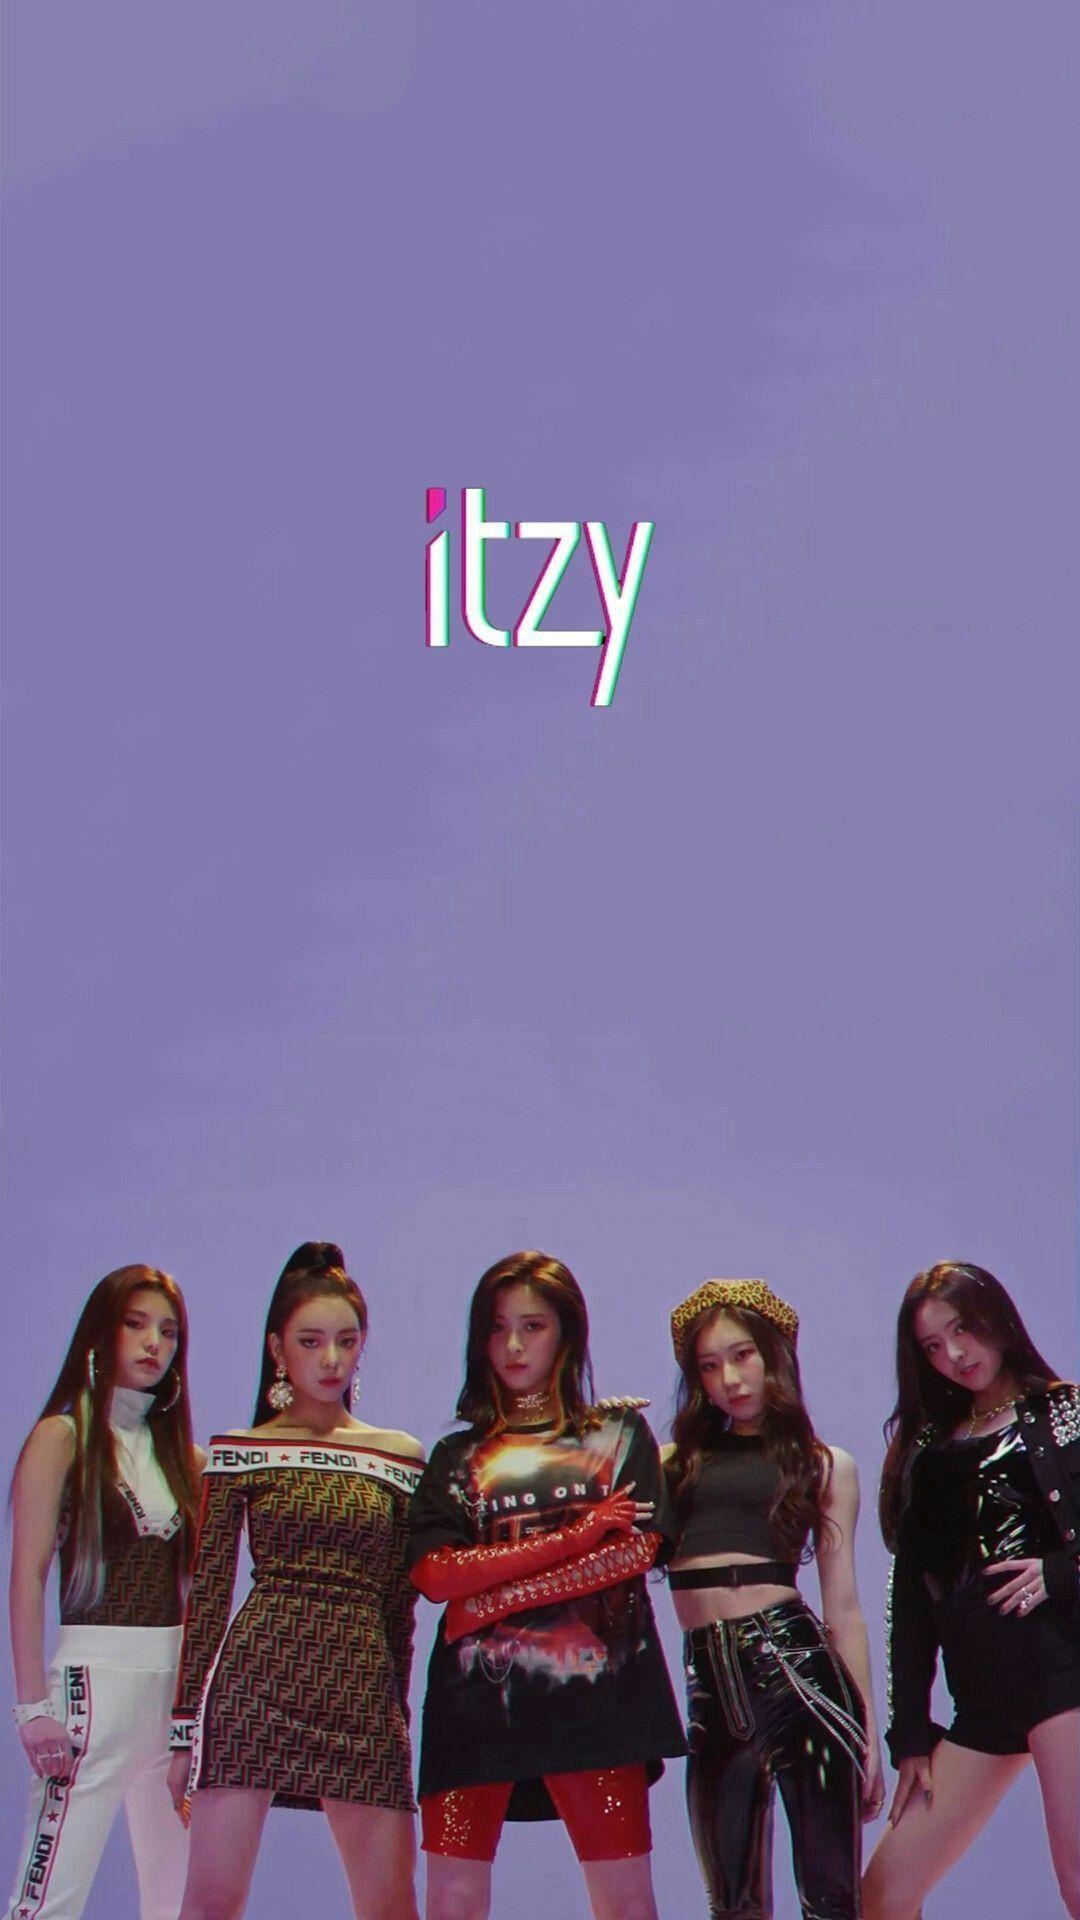 15 Perfect itzy aesthetic wallpaper desktop You Can Get It free ...